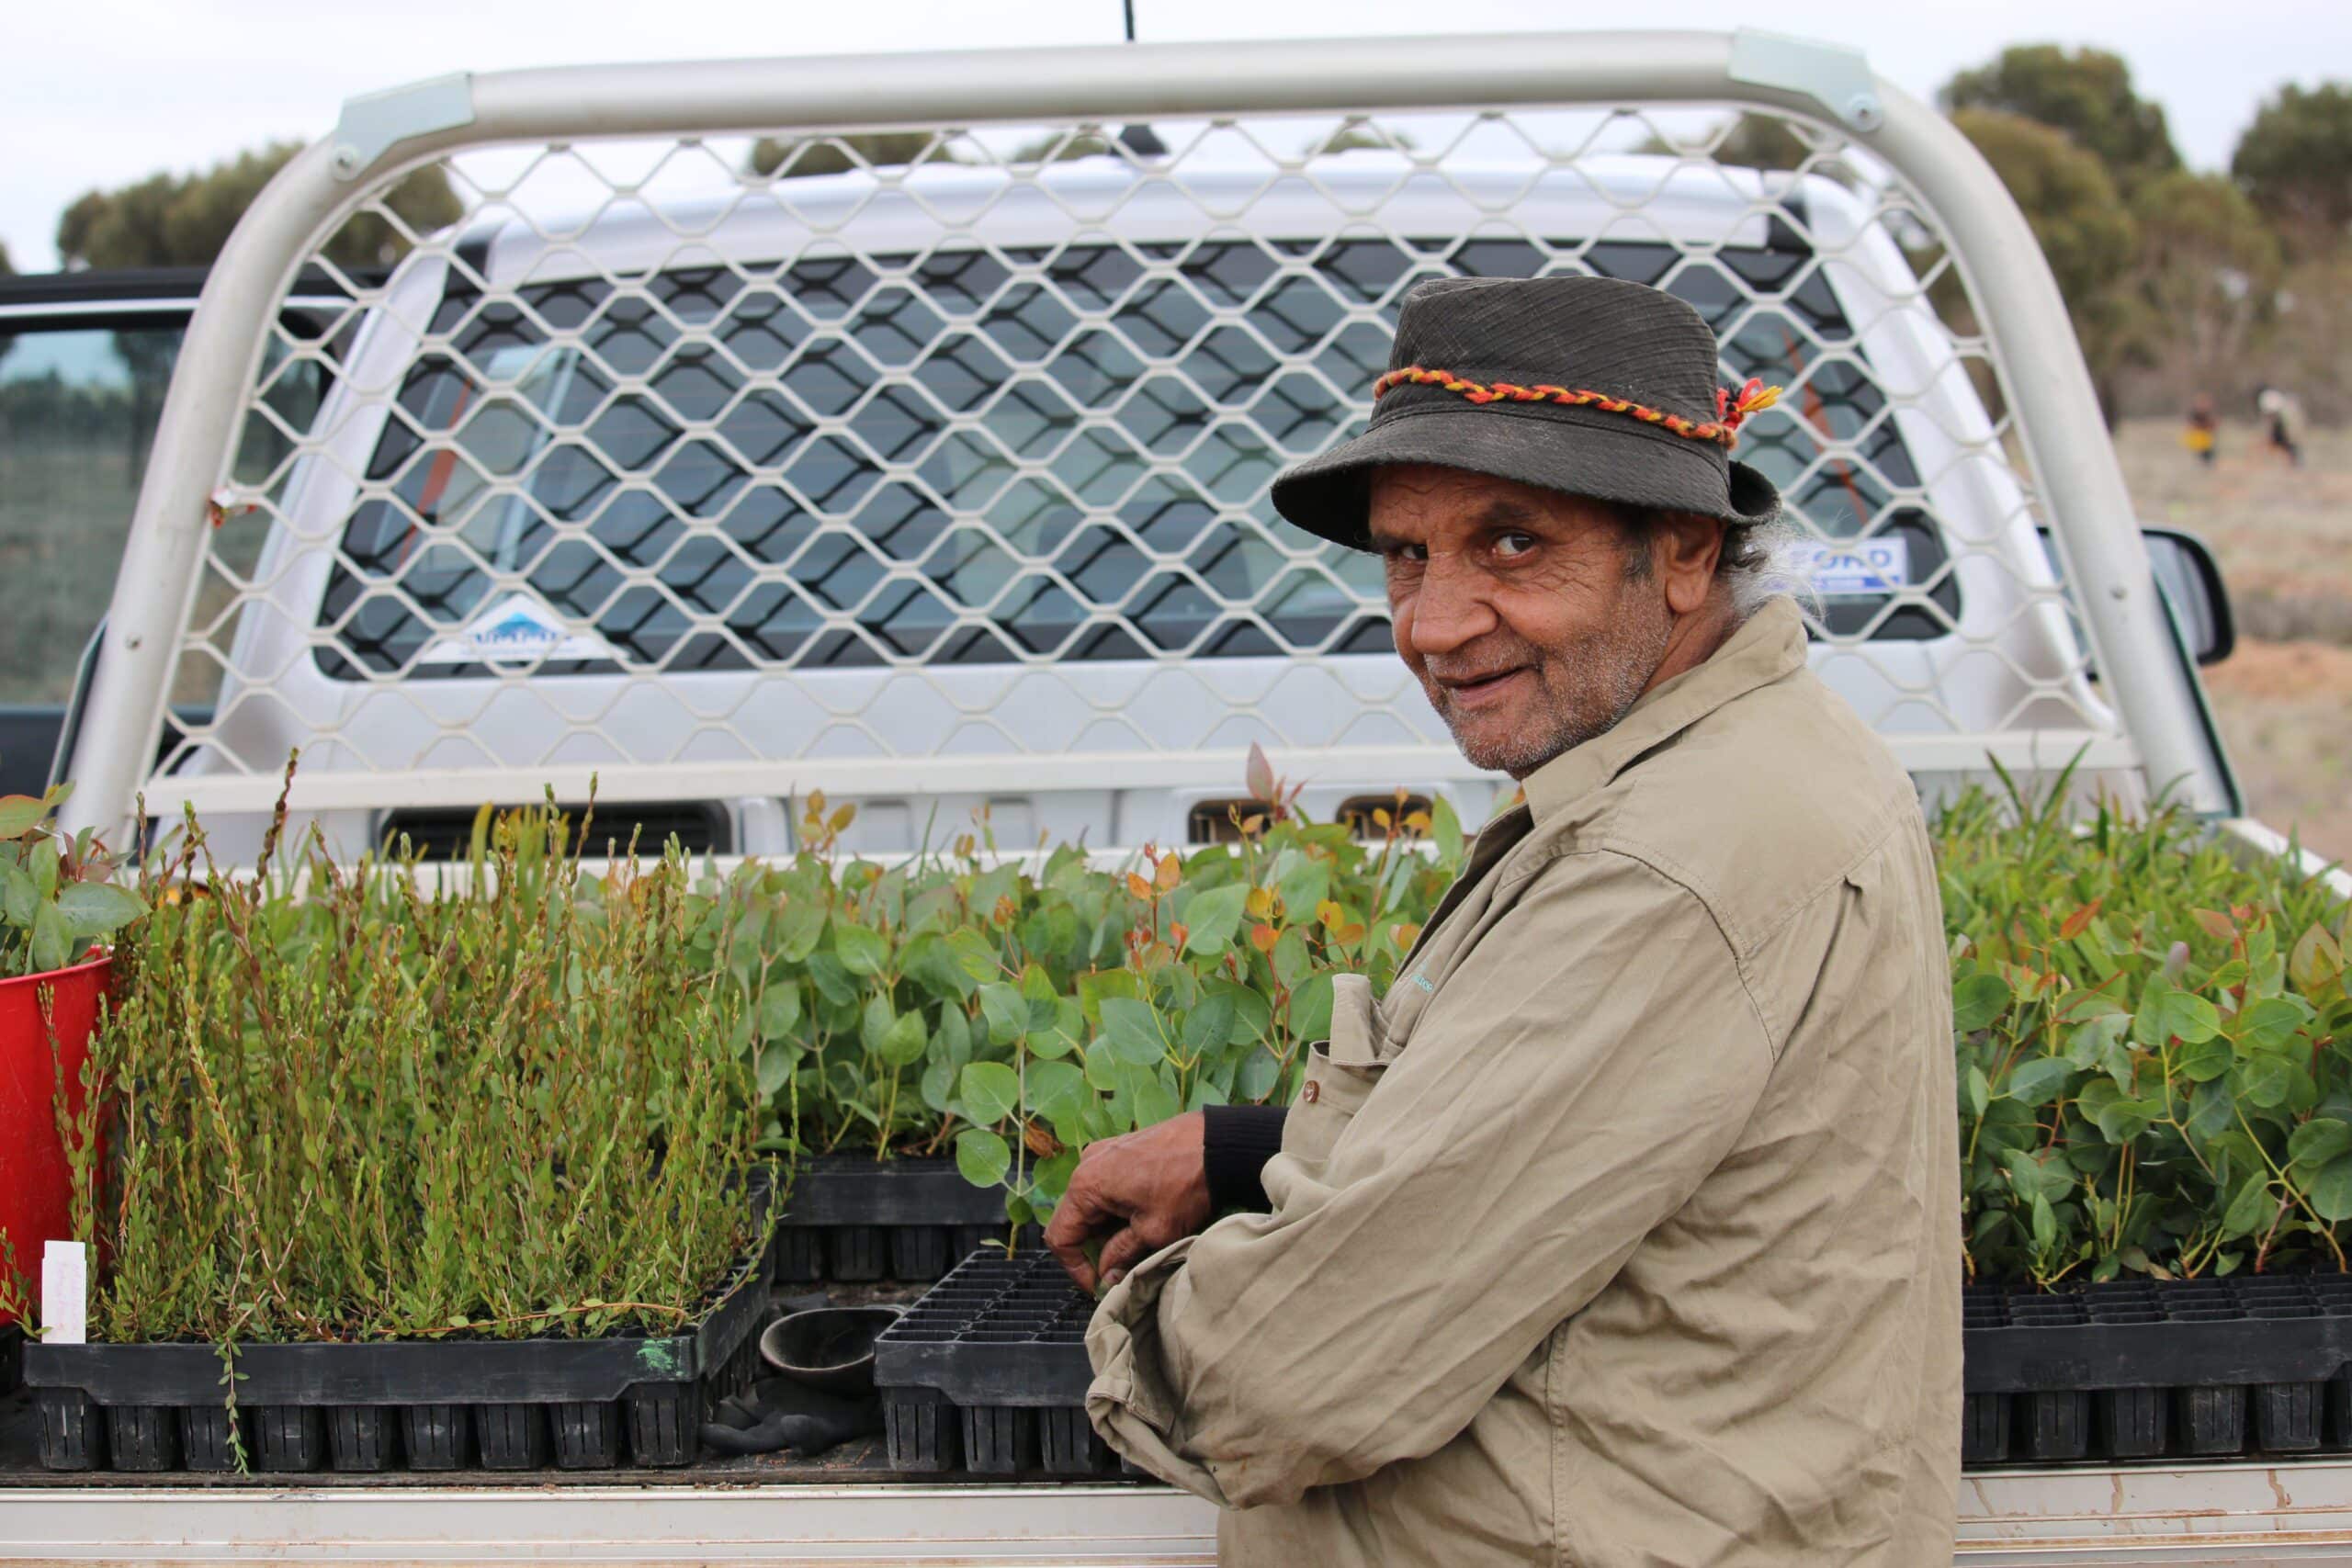 Man in a hat and long sleeve shirt turning around in front of a ute tray full of seedlings.